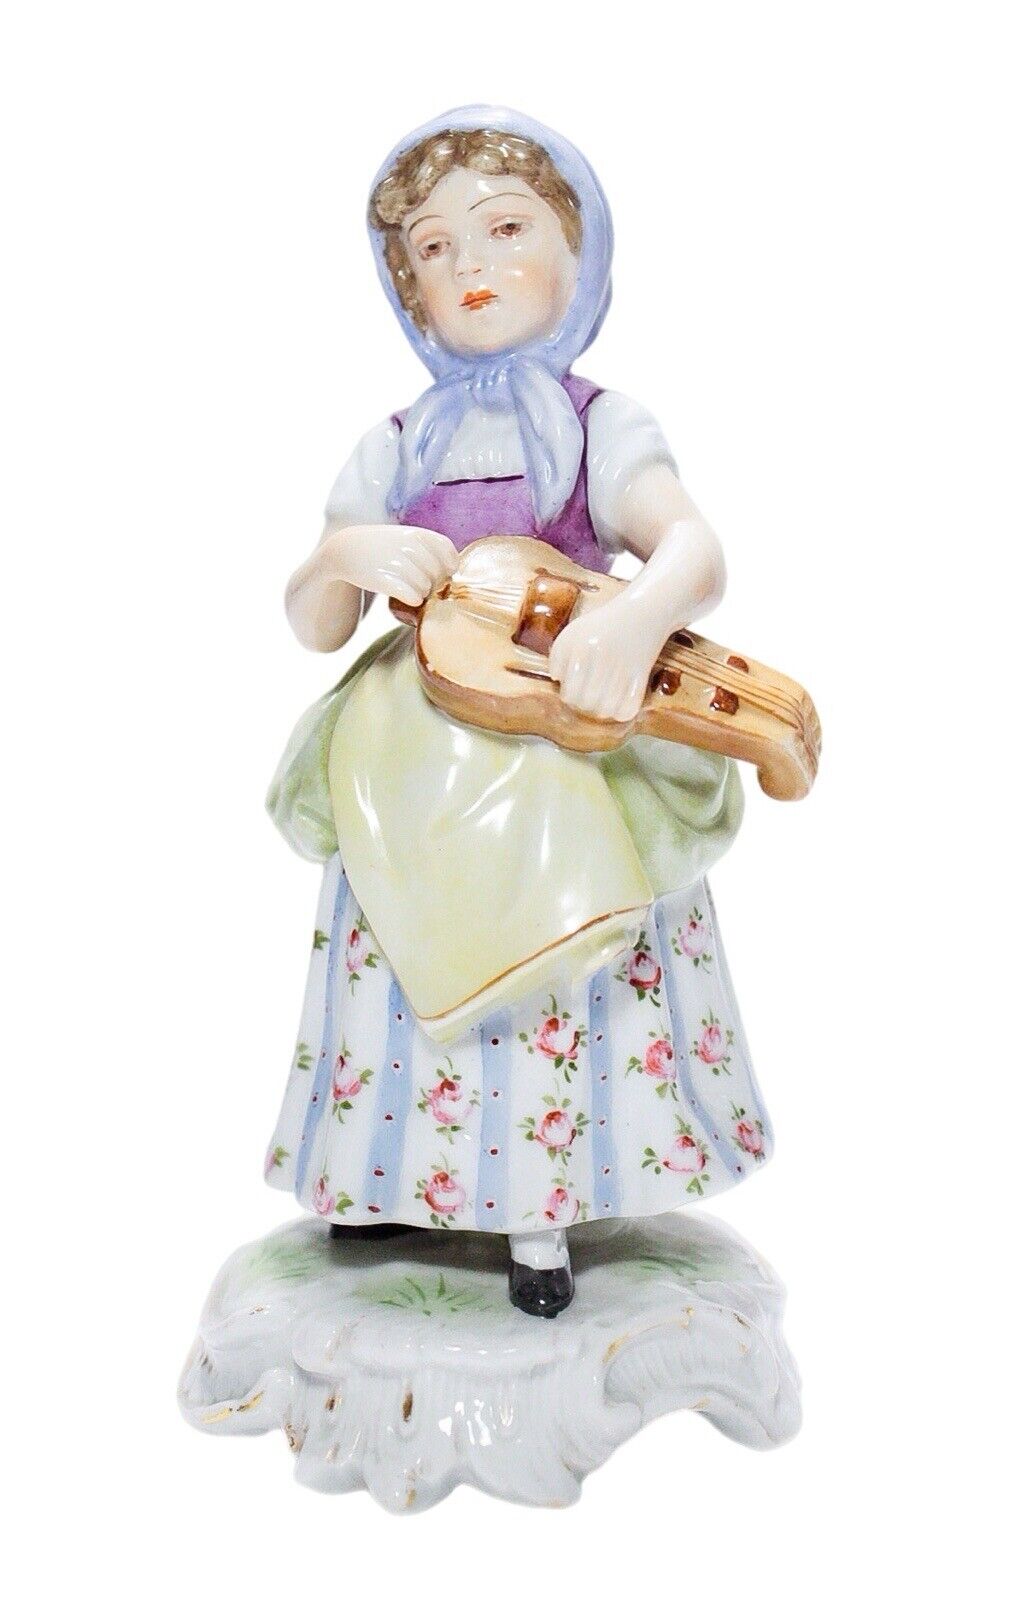 Antique Germany Hallmarked Hand Painted  Lady w/ Violin Porcelain Figurine